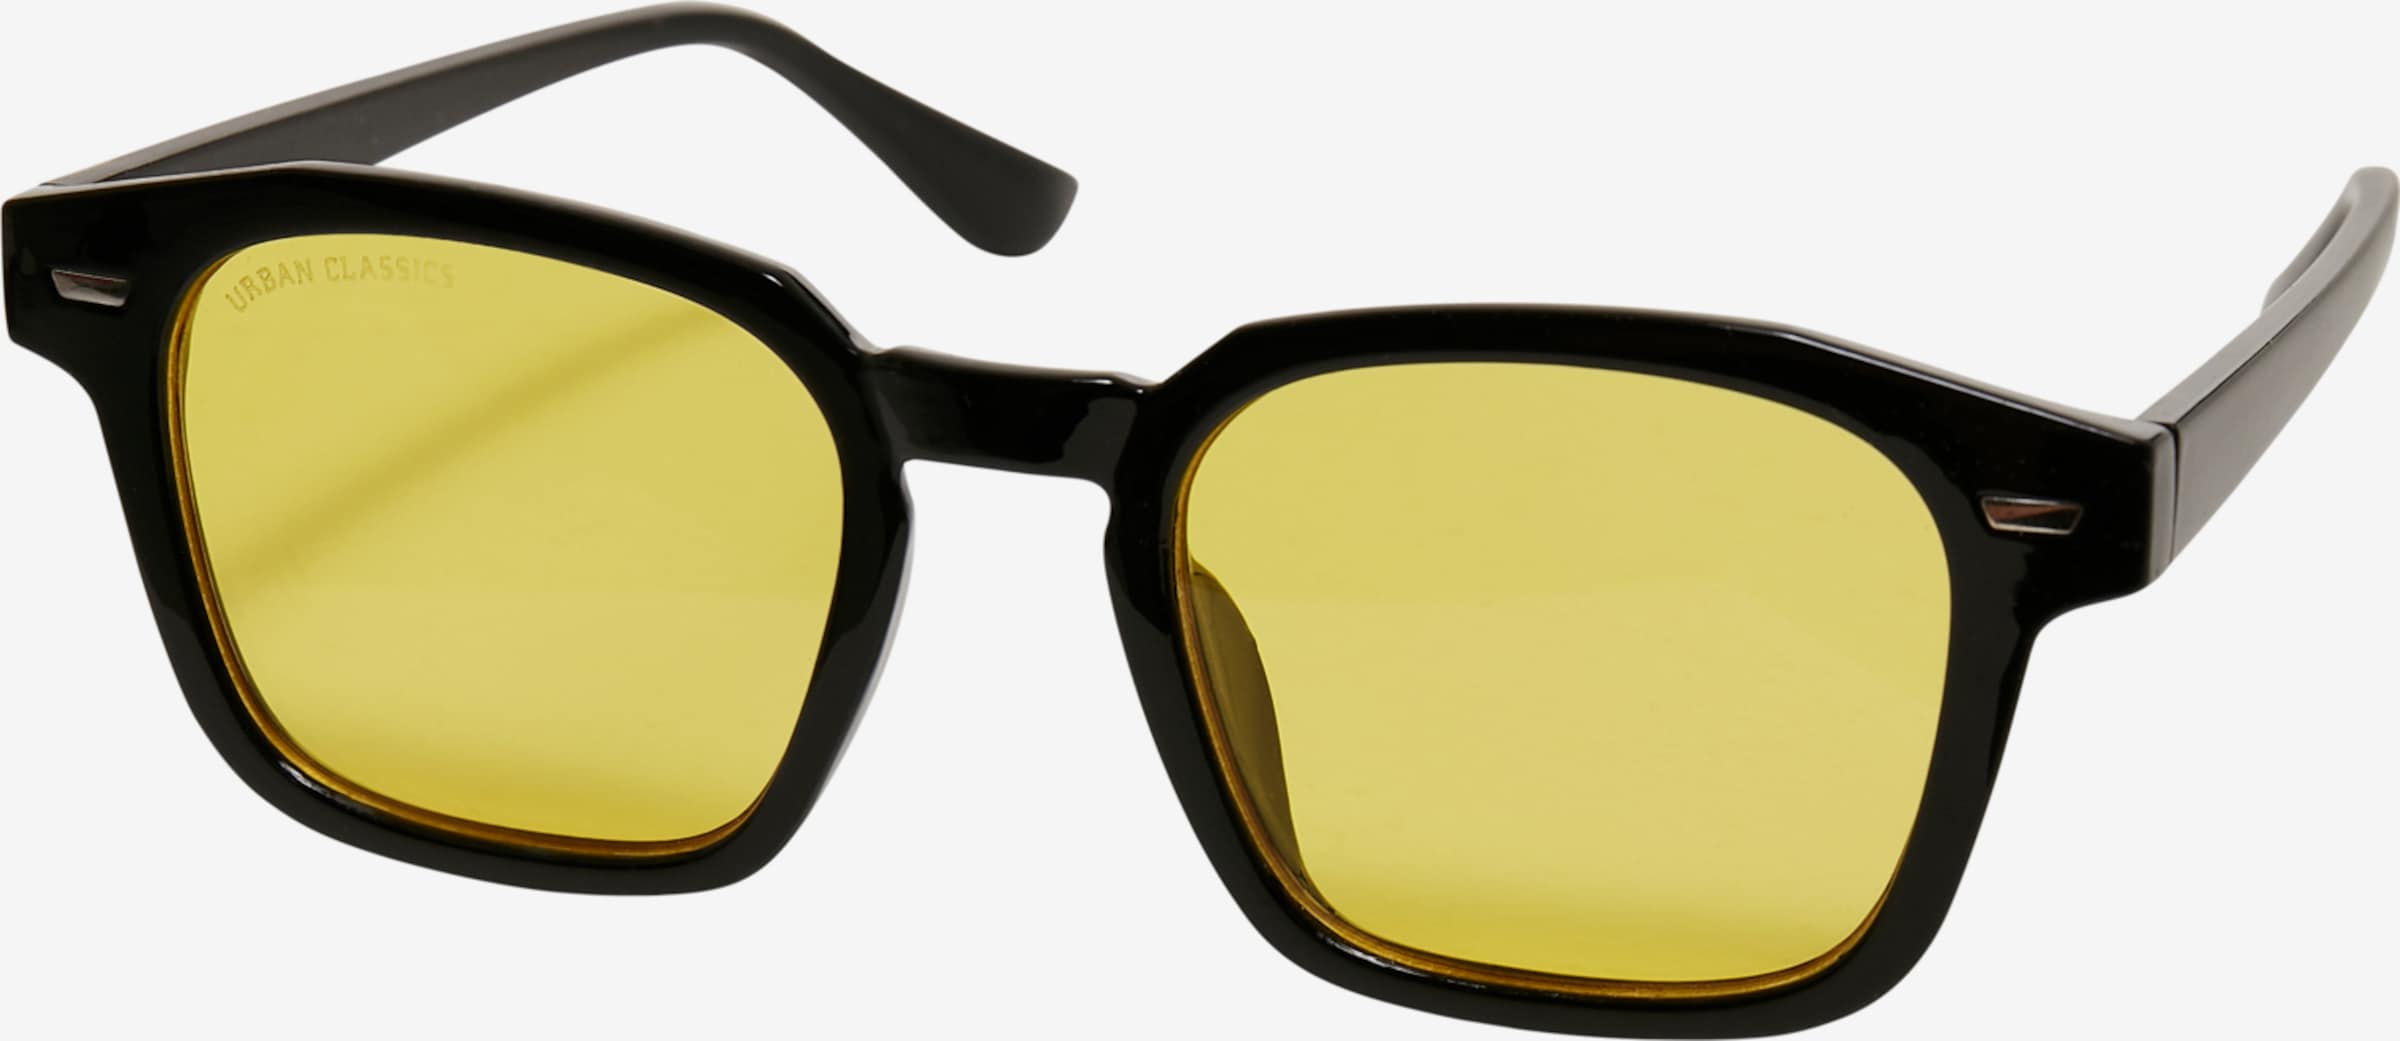 Urban Classics Sonnenbrille 'Maui' in Schwarz | ABOUT YOU